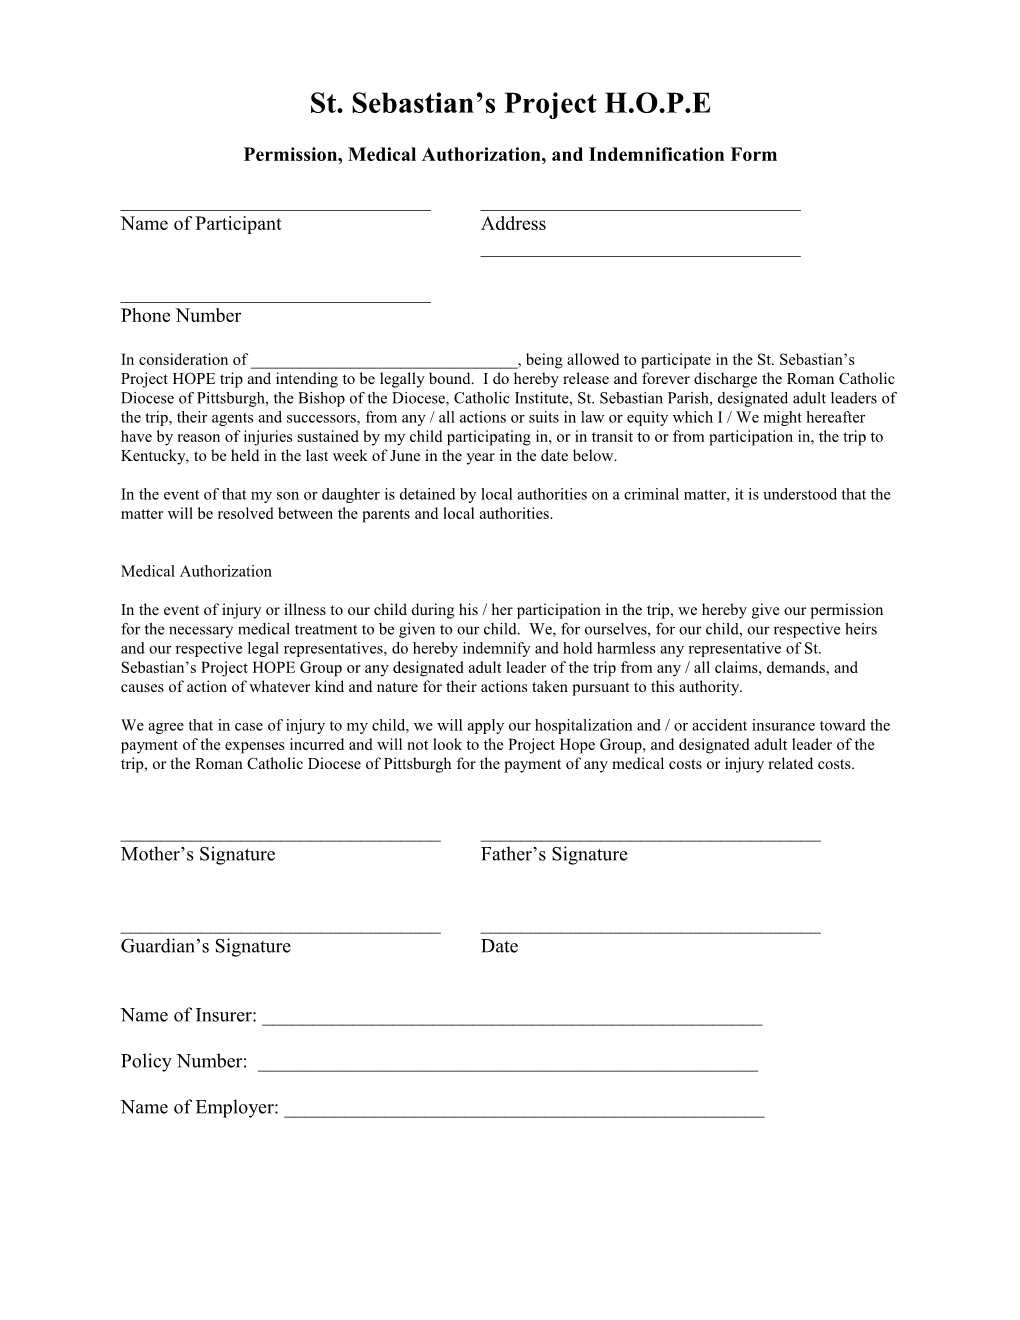 Permission, Medical Authorization, and Indemnification Form